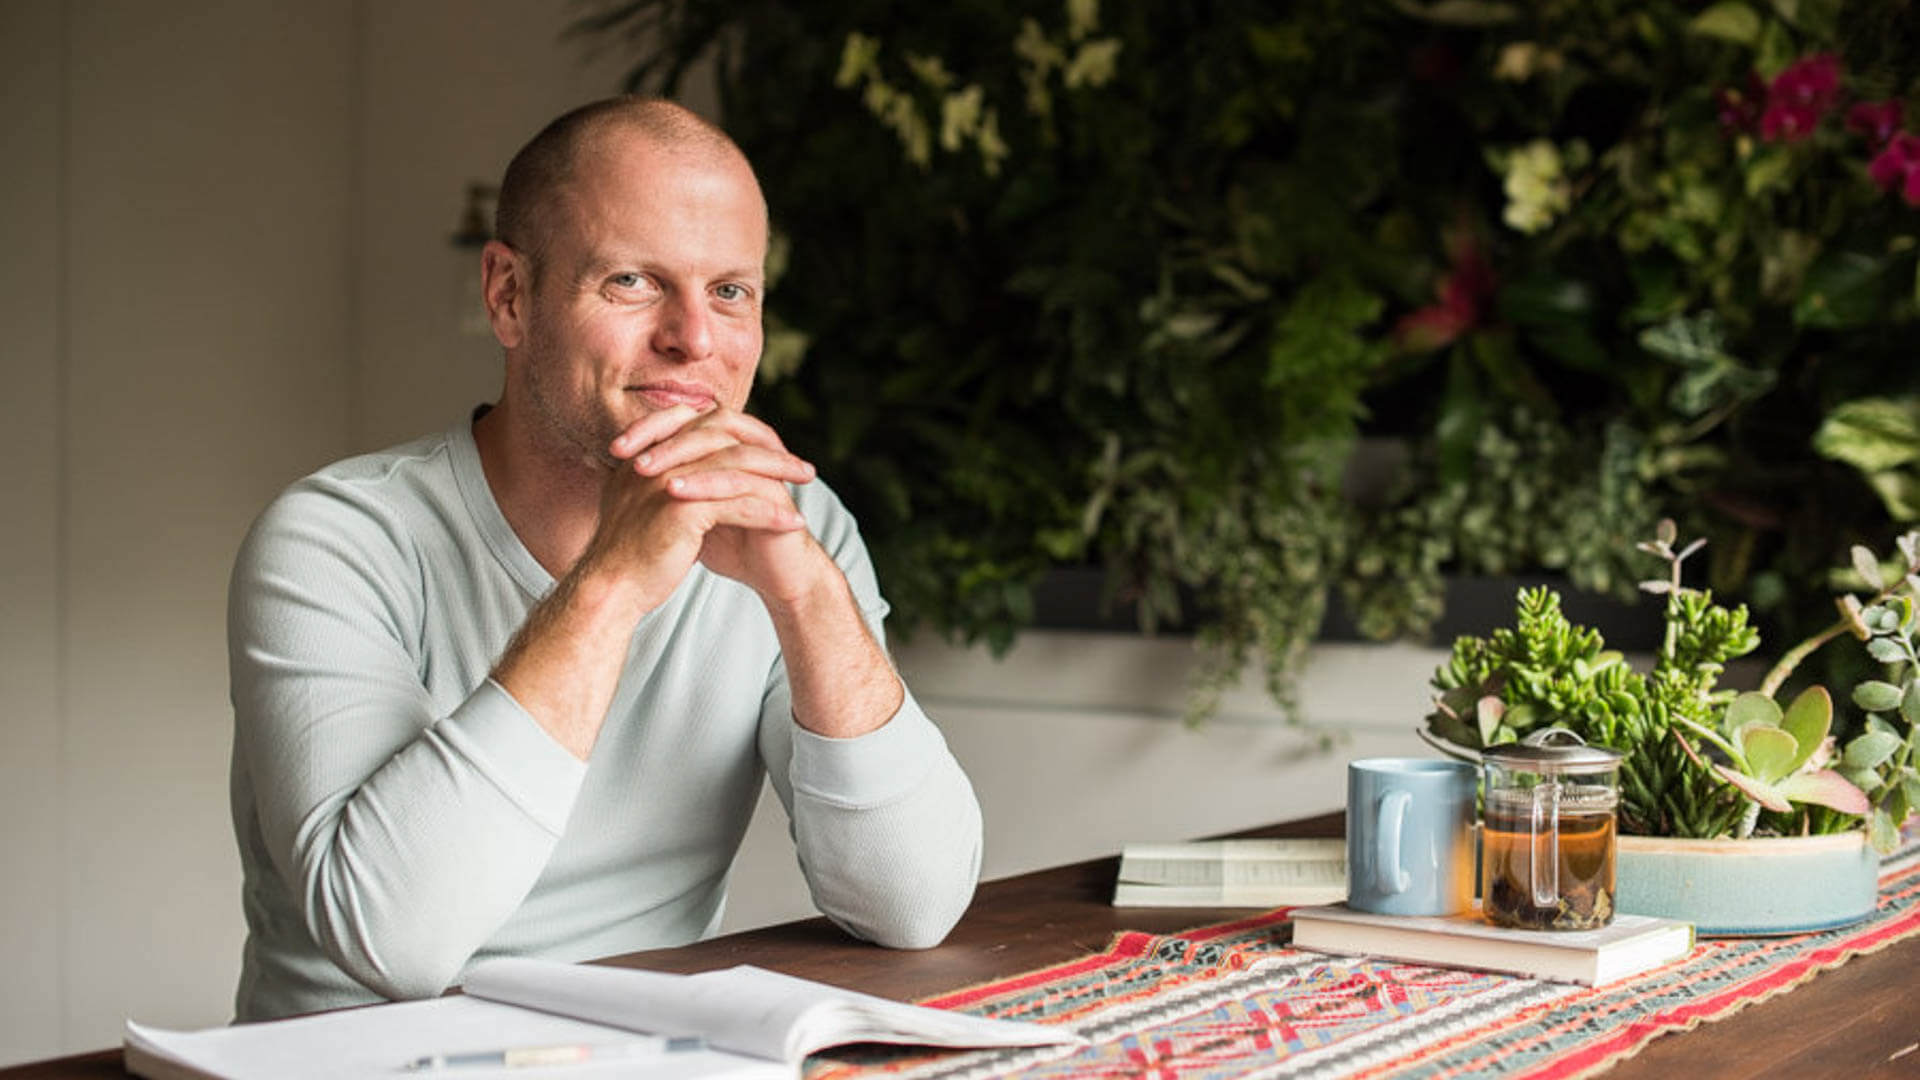 ‘4-hour workweek’ author tim ferriss’ 3 top passive income ideas